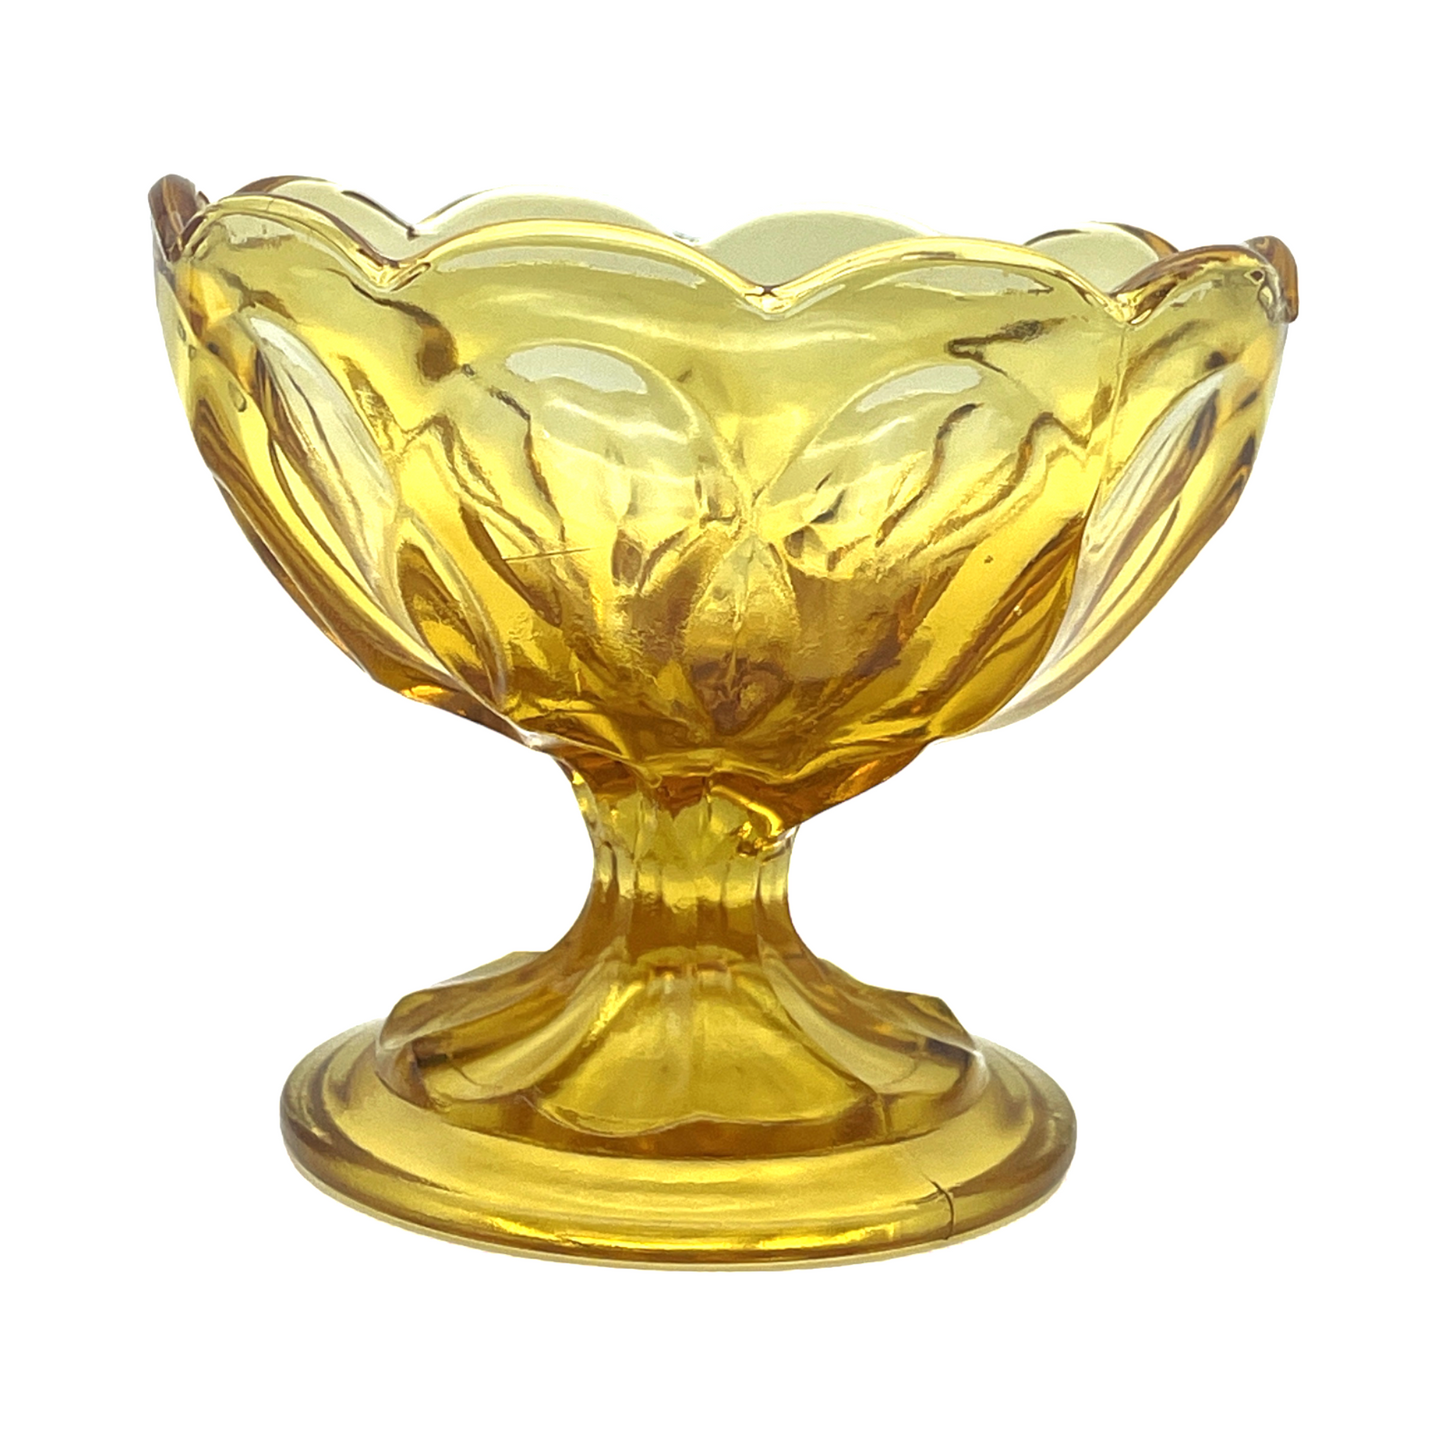 Anchor Hocking - Fairfield Amber Compote - 3.75"